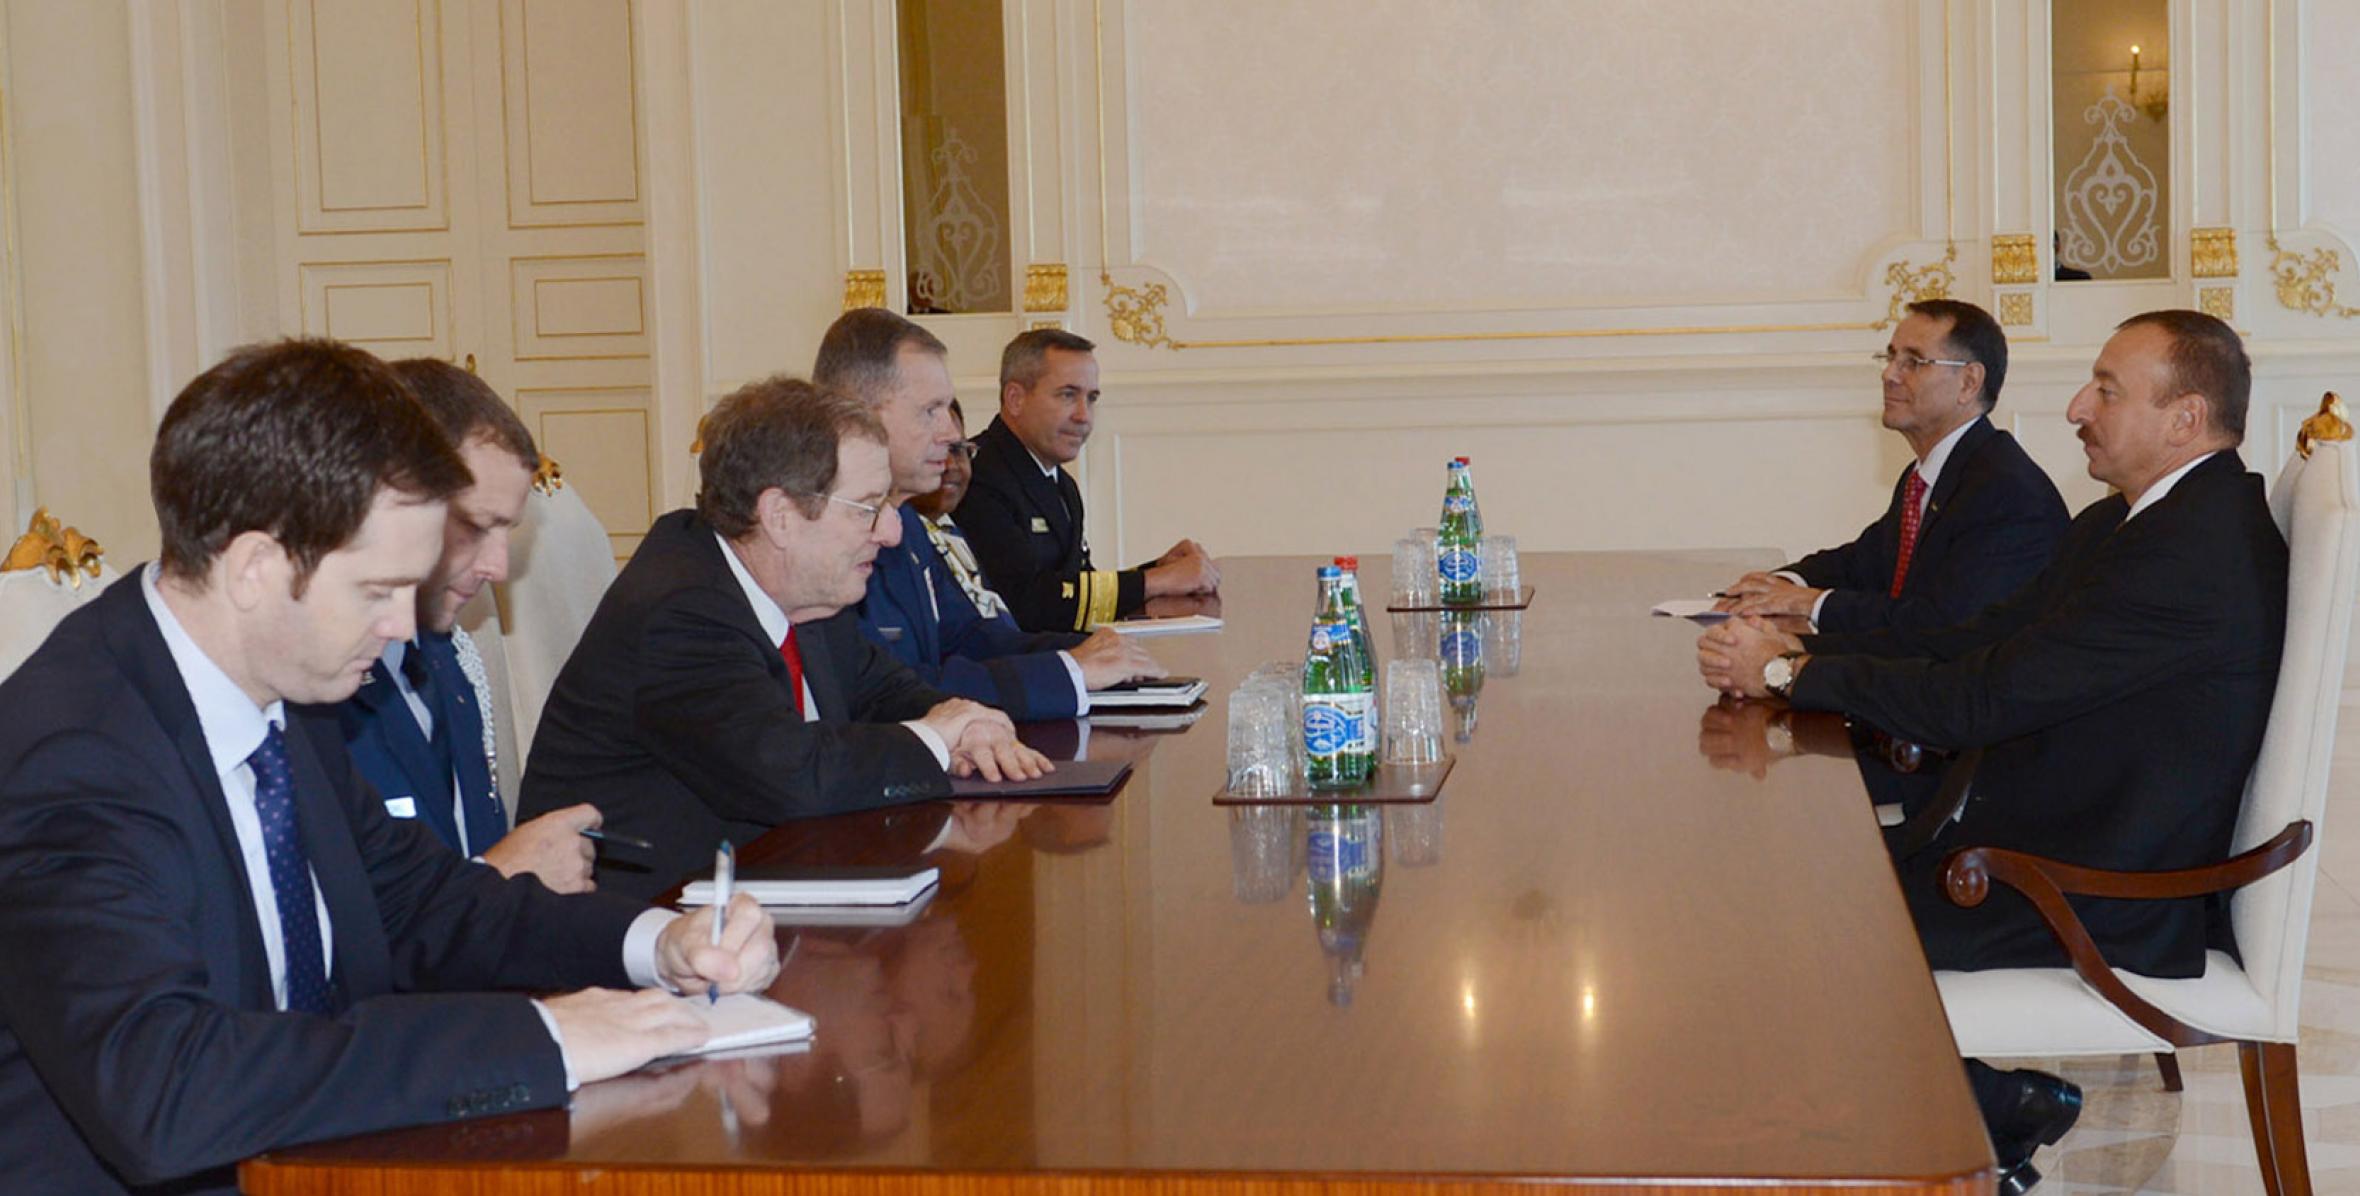 Ilham Aliyev received the delegation led by Commander of the United States Transportation Command